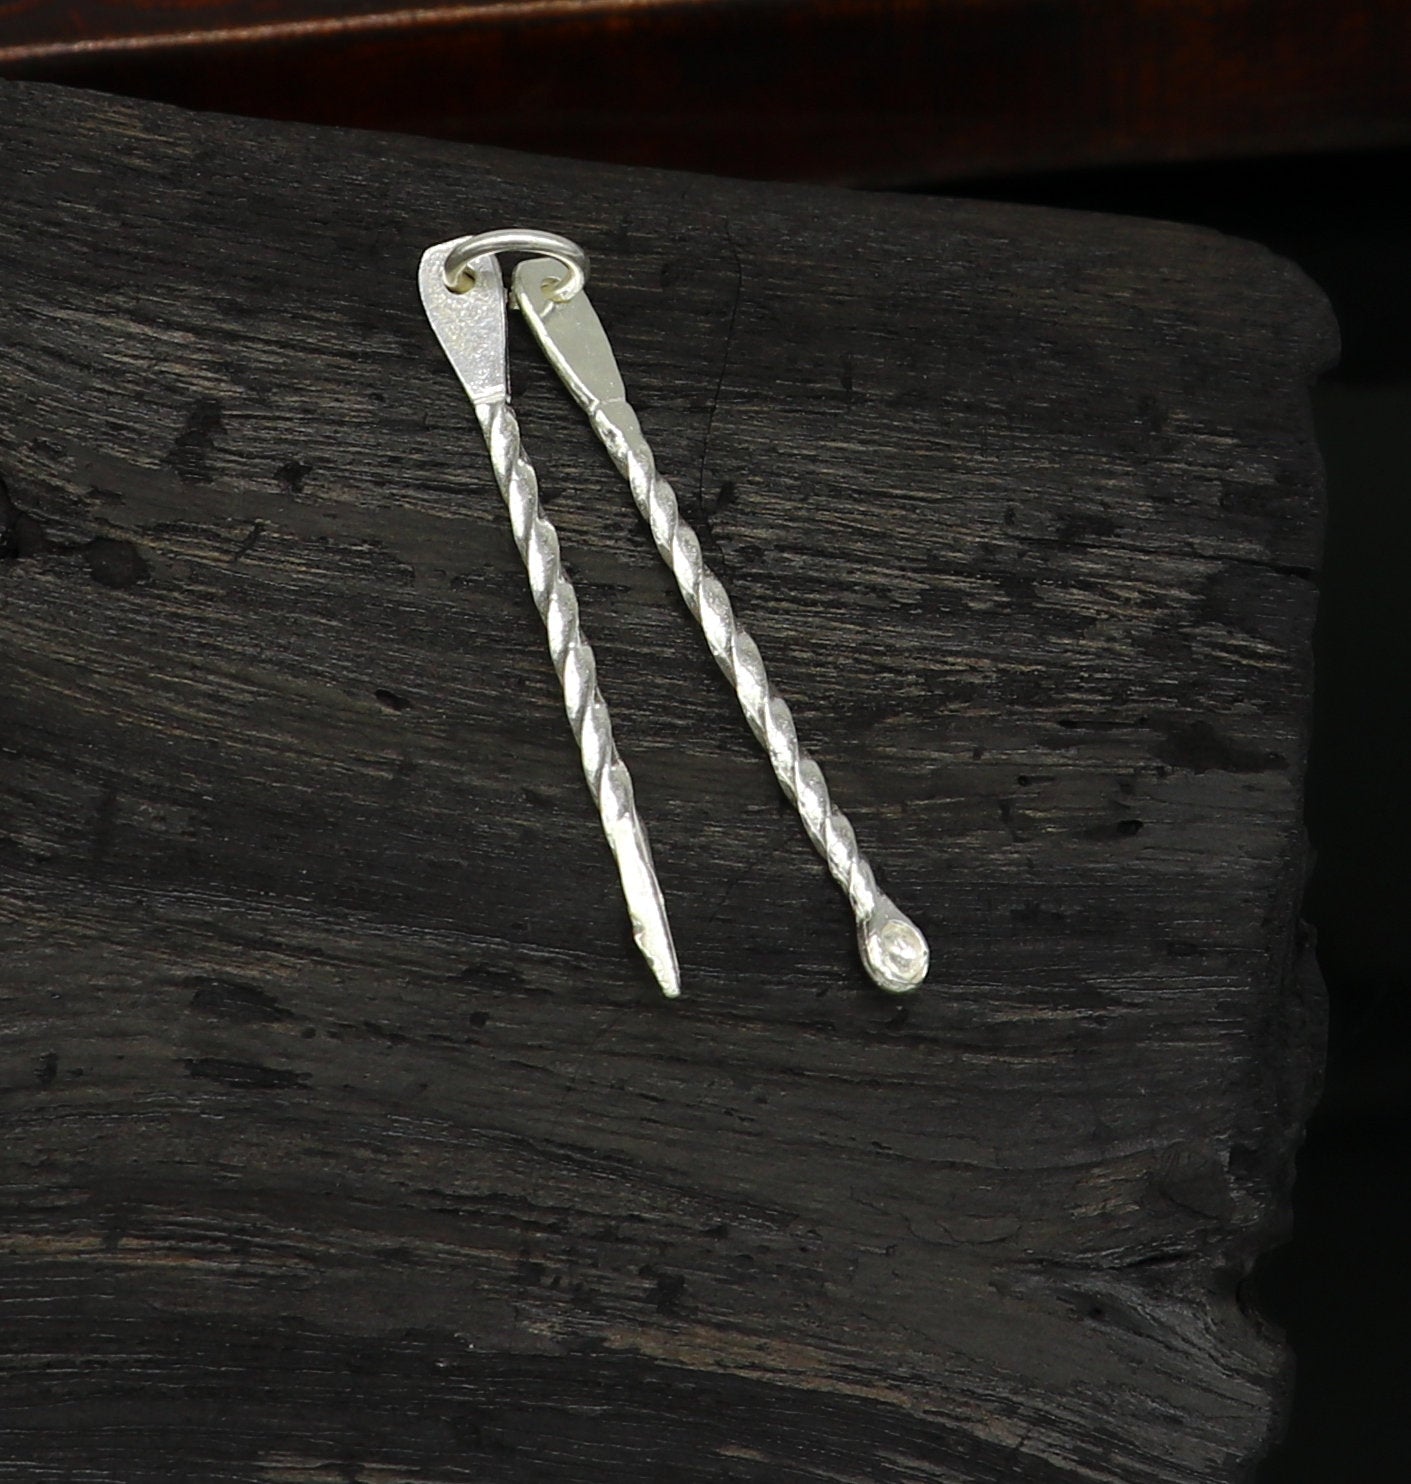 Solid silver toothpick and ear cleaner, Silver is Anti-Microbial, Anti-Allergic, Anti-Septic Silver is the best metal for personal safety - TRIBAL ORNAMENTS